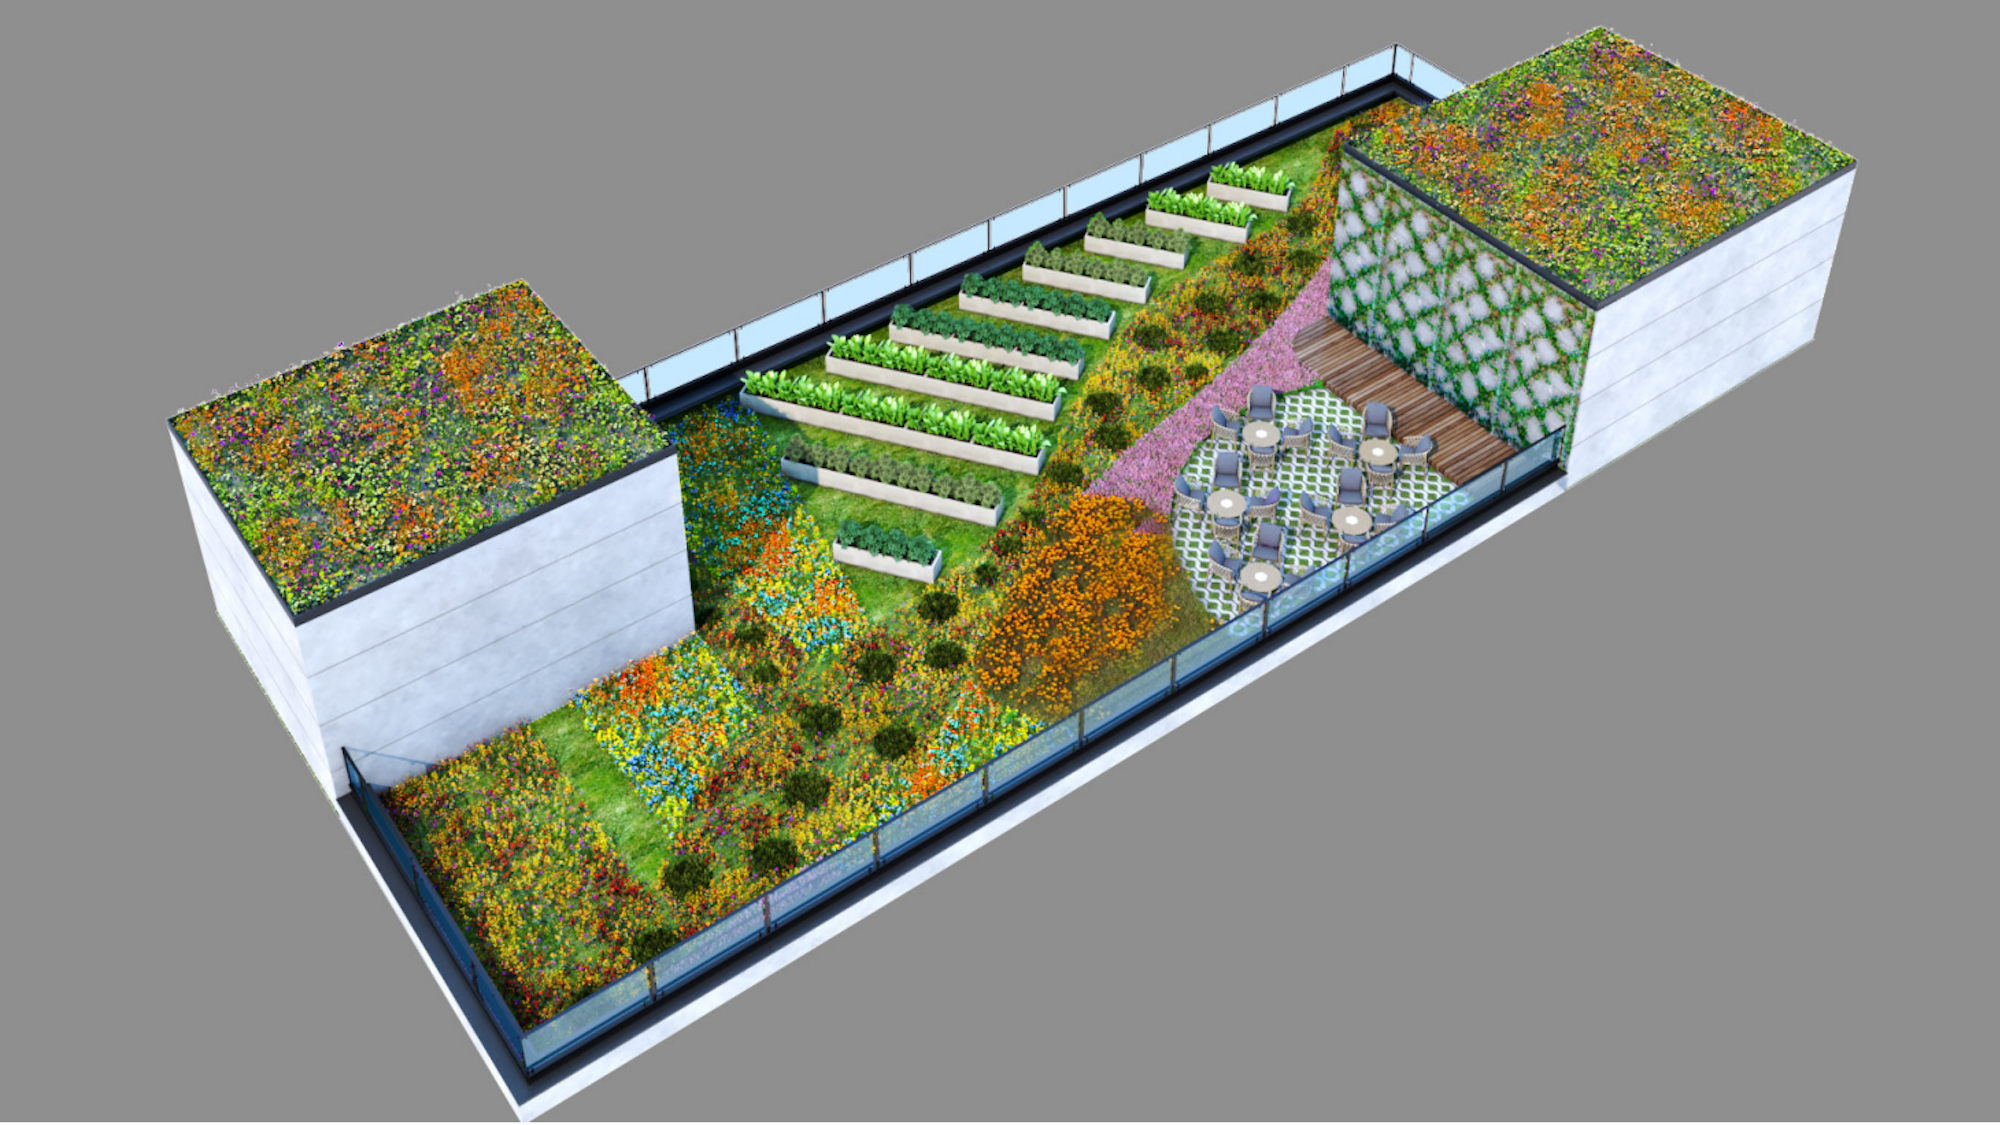 3D isometric plan of an intensive green roof with wildflowers, seating areas and an urban farm